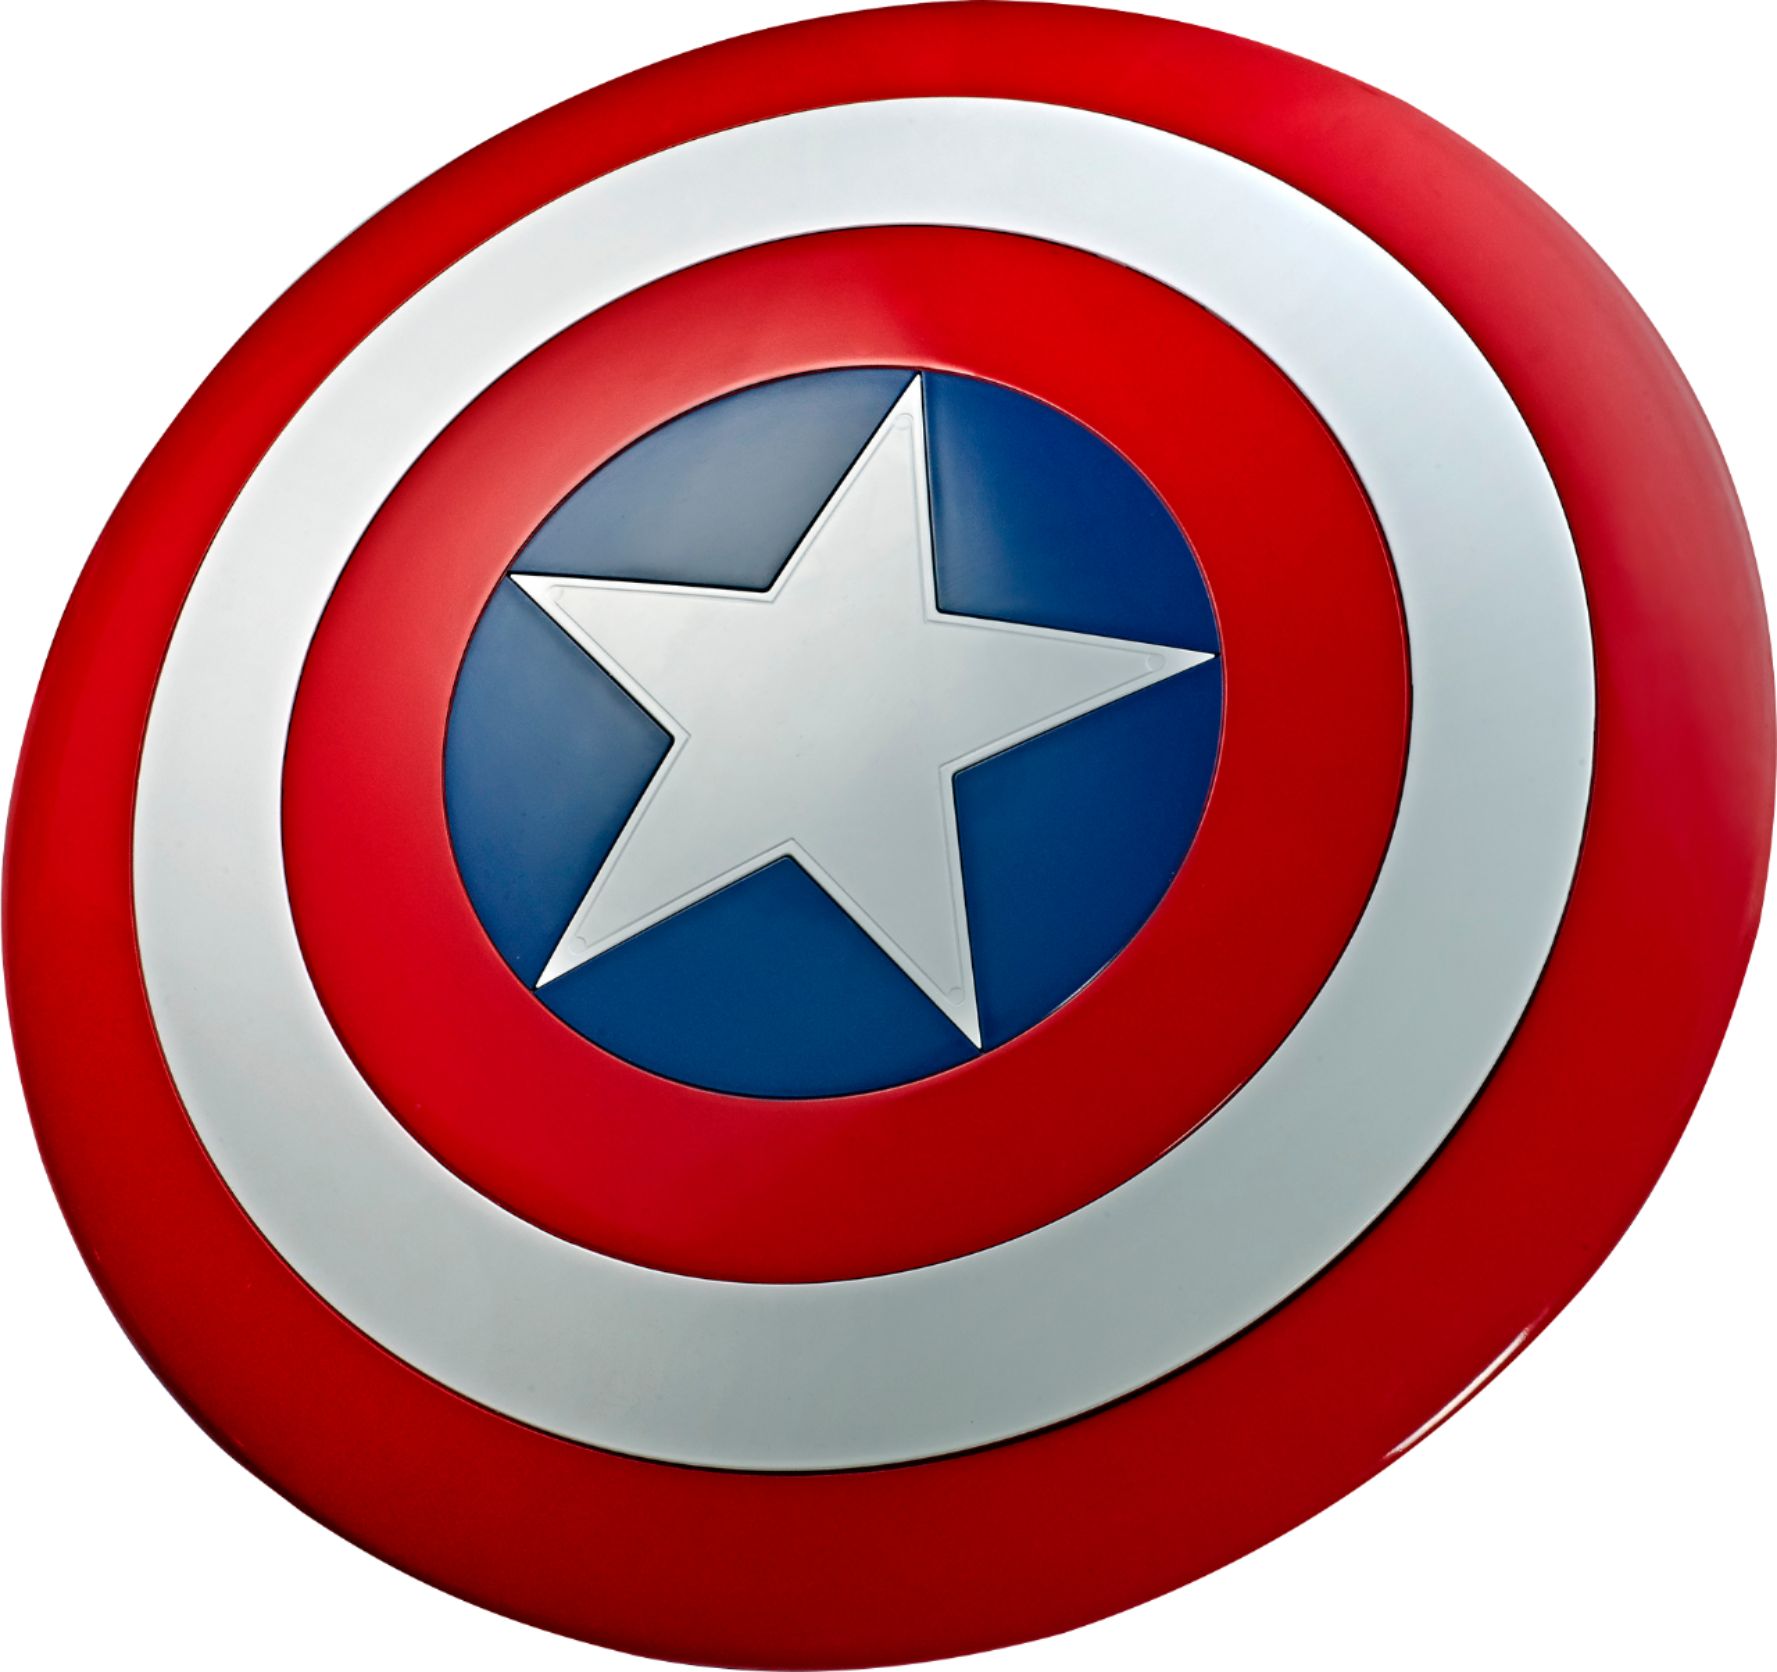 1:1 The Avengers Captain America Shield Strong Metal Made Cosplay Props Xmas 